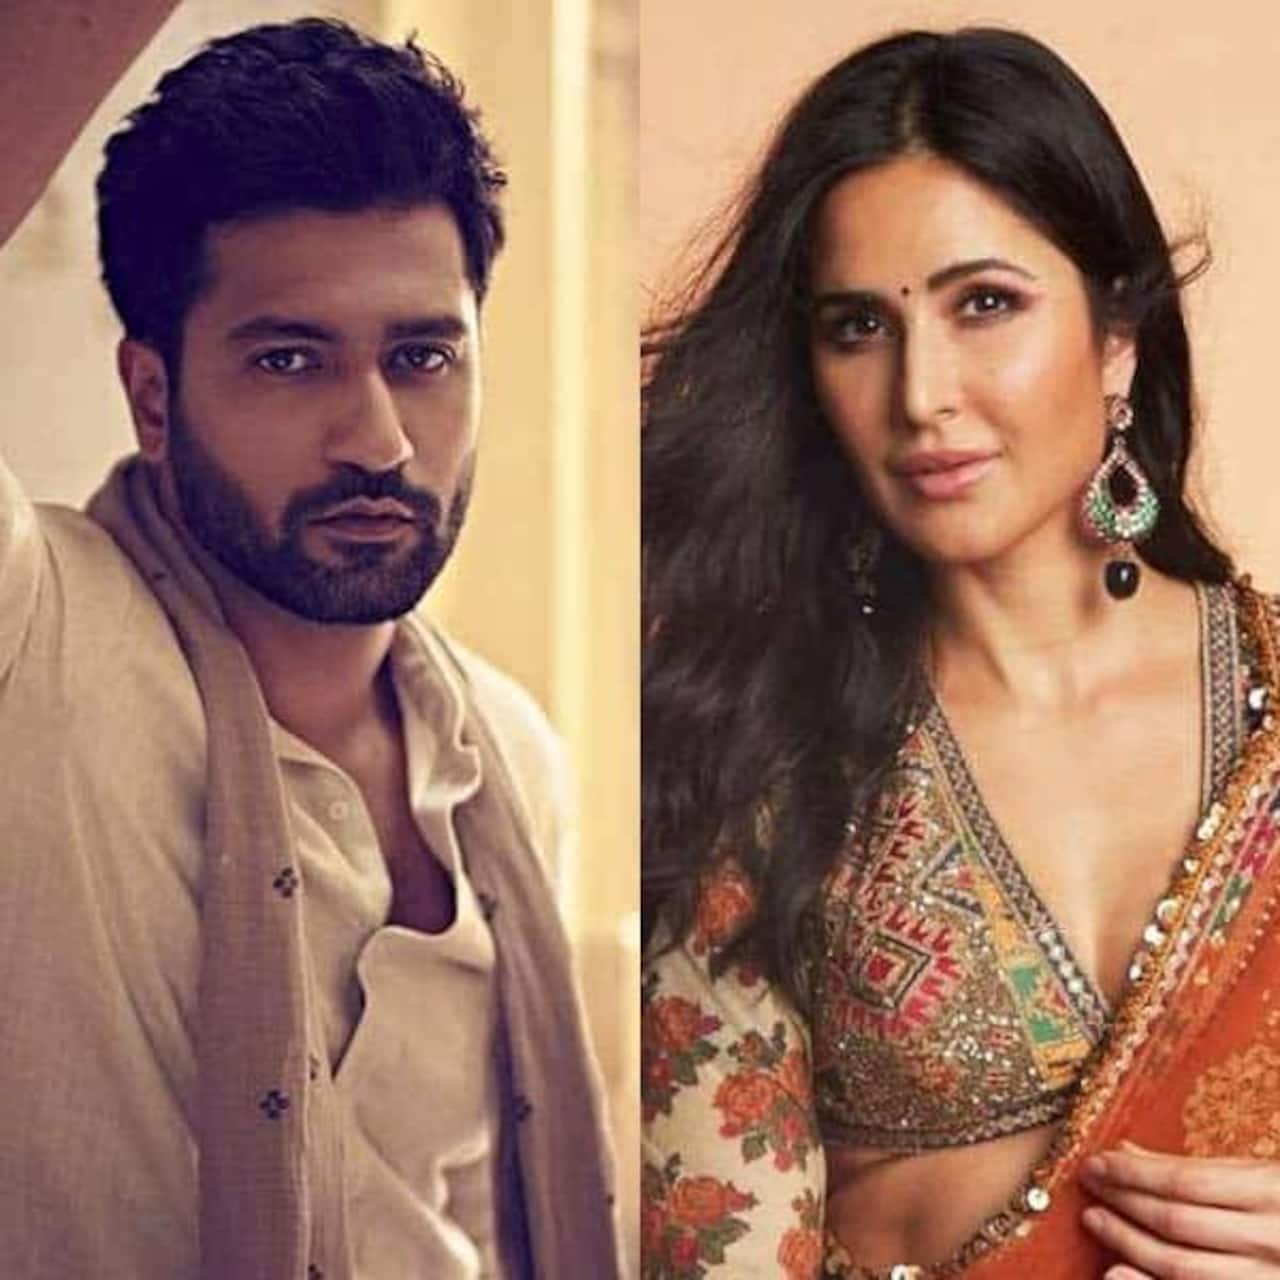 Katrina Kaif and Vicky Kaushal to get married in Mumbai next week? [Exclusive]